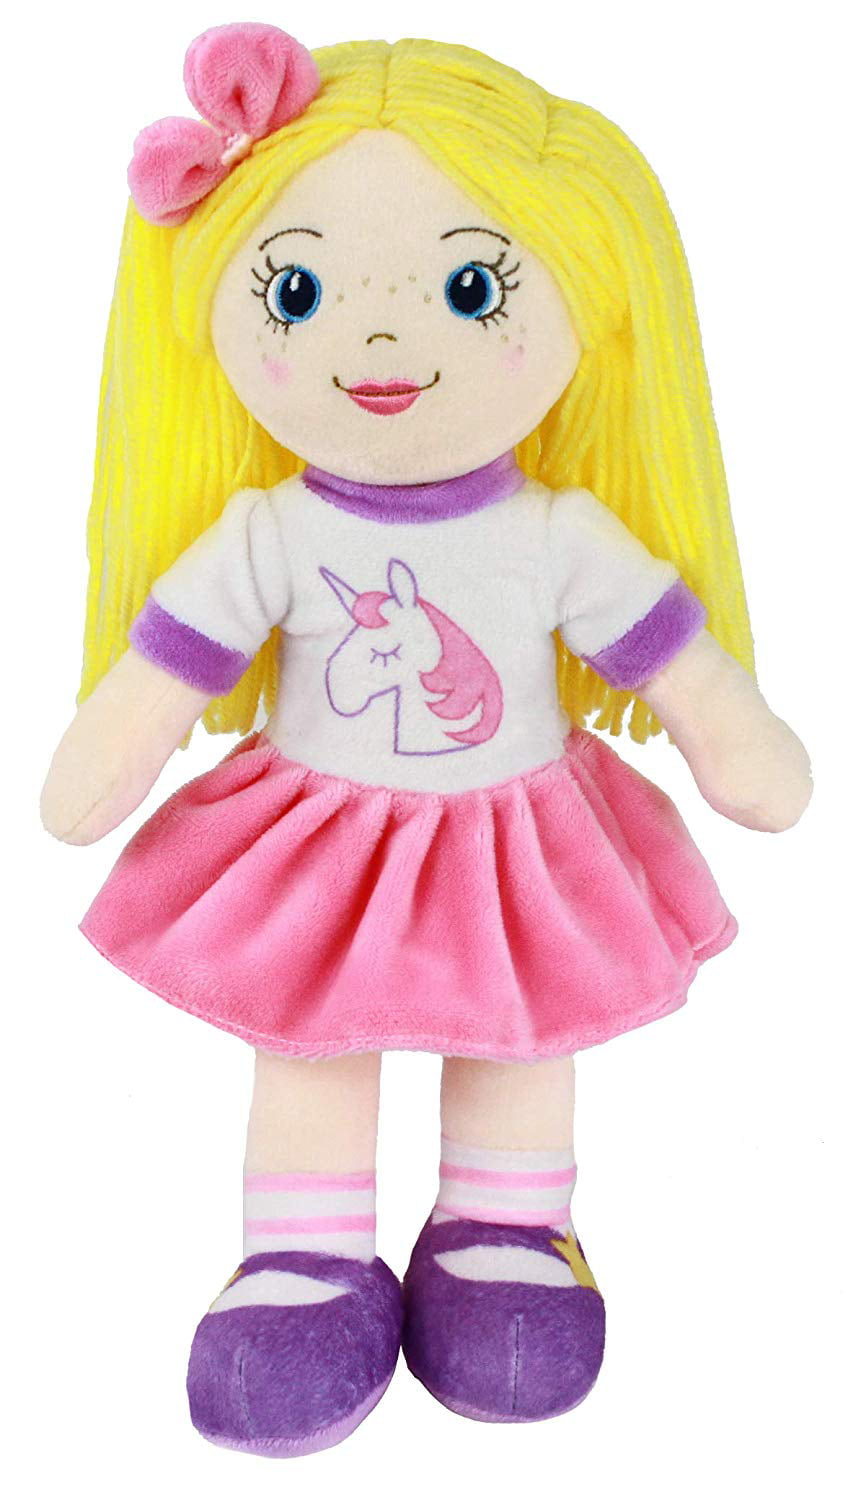 Safe for All Ages Plush Baby Toy 14” First Baby Doll for Kids Playtime by Eimmie Soft Rag Doll Julie The Salsa Dancer 